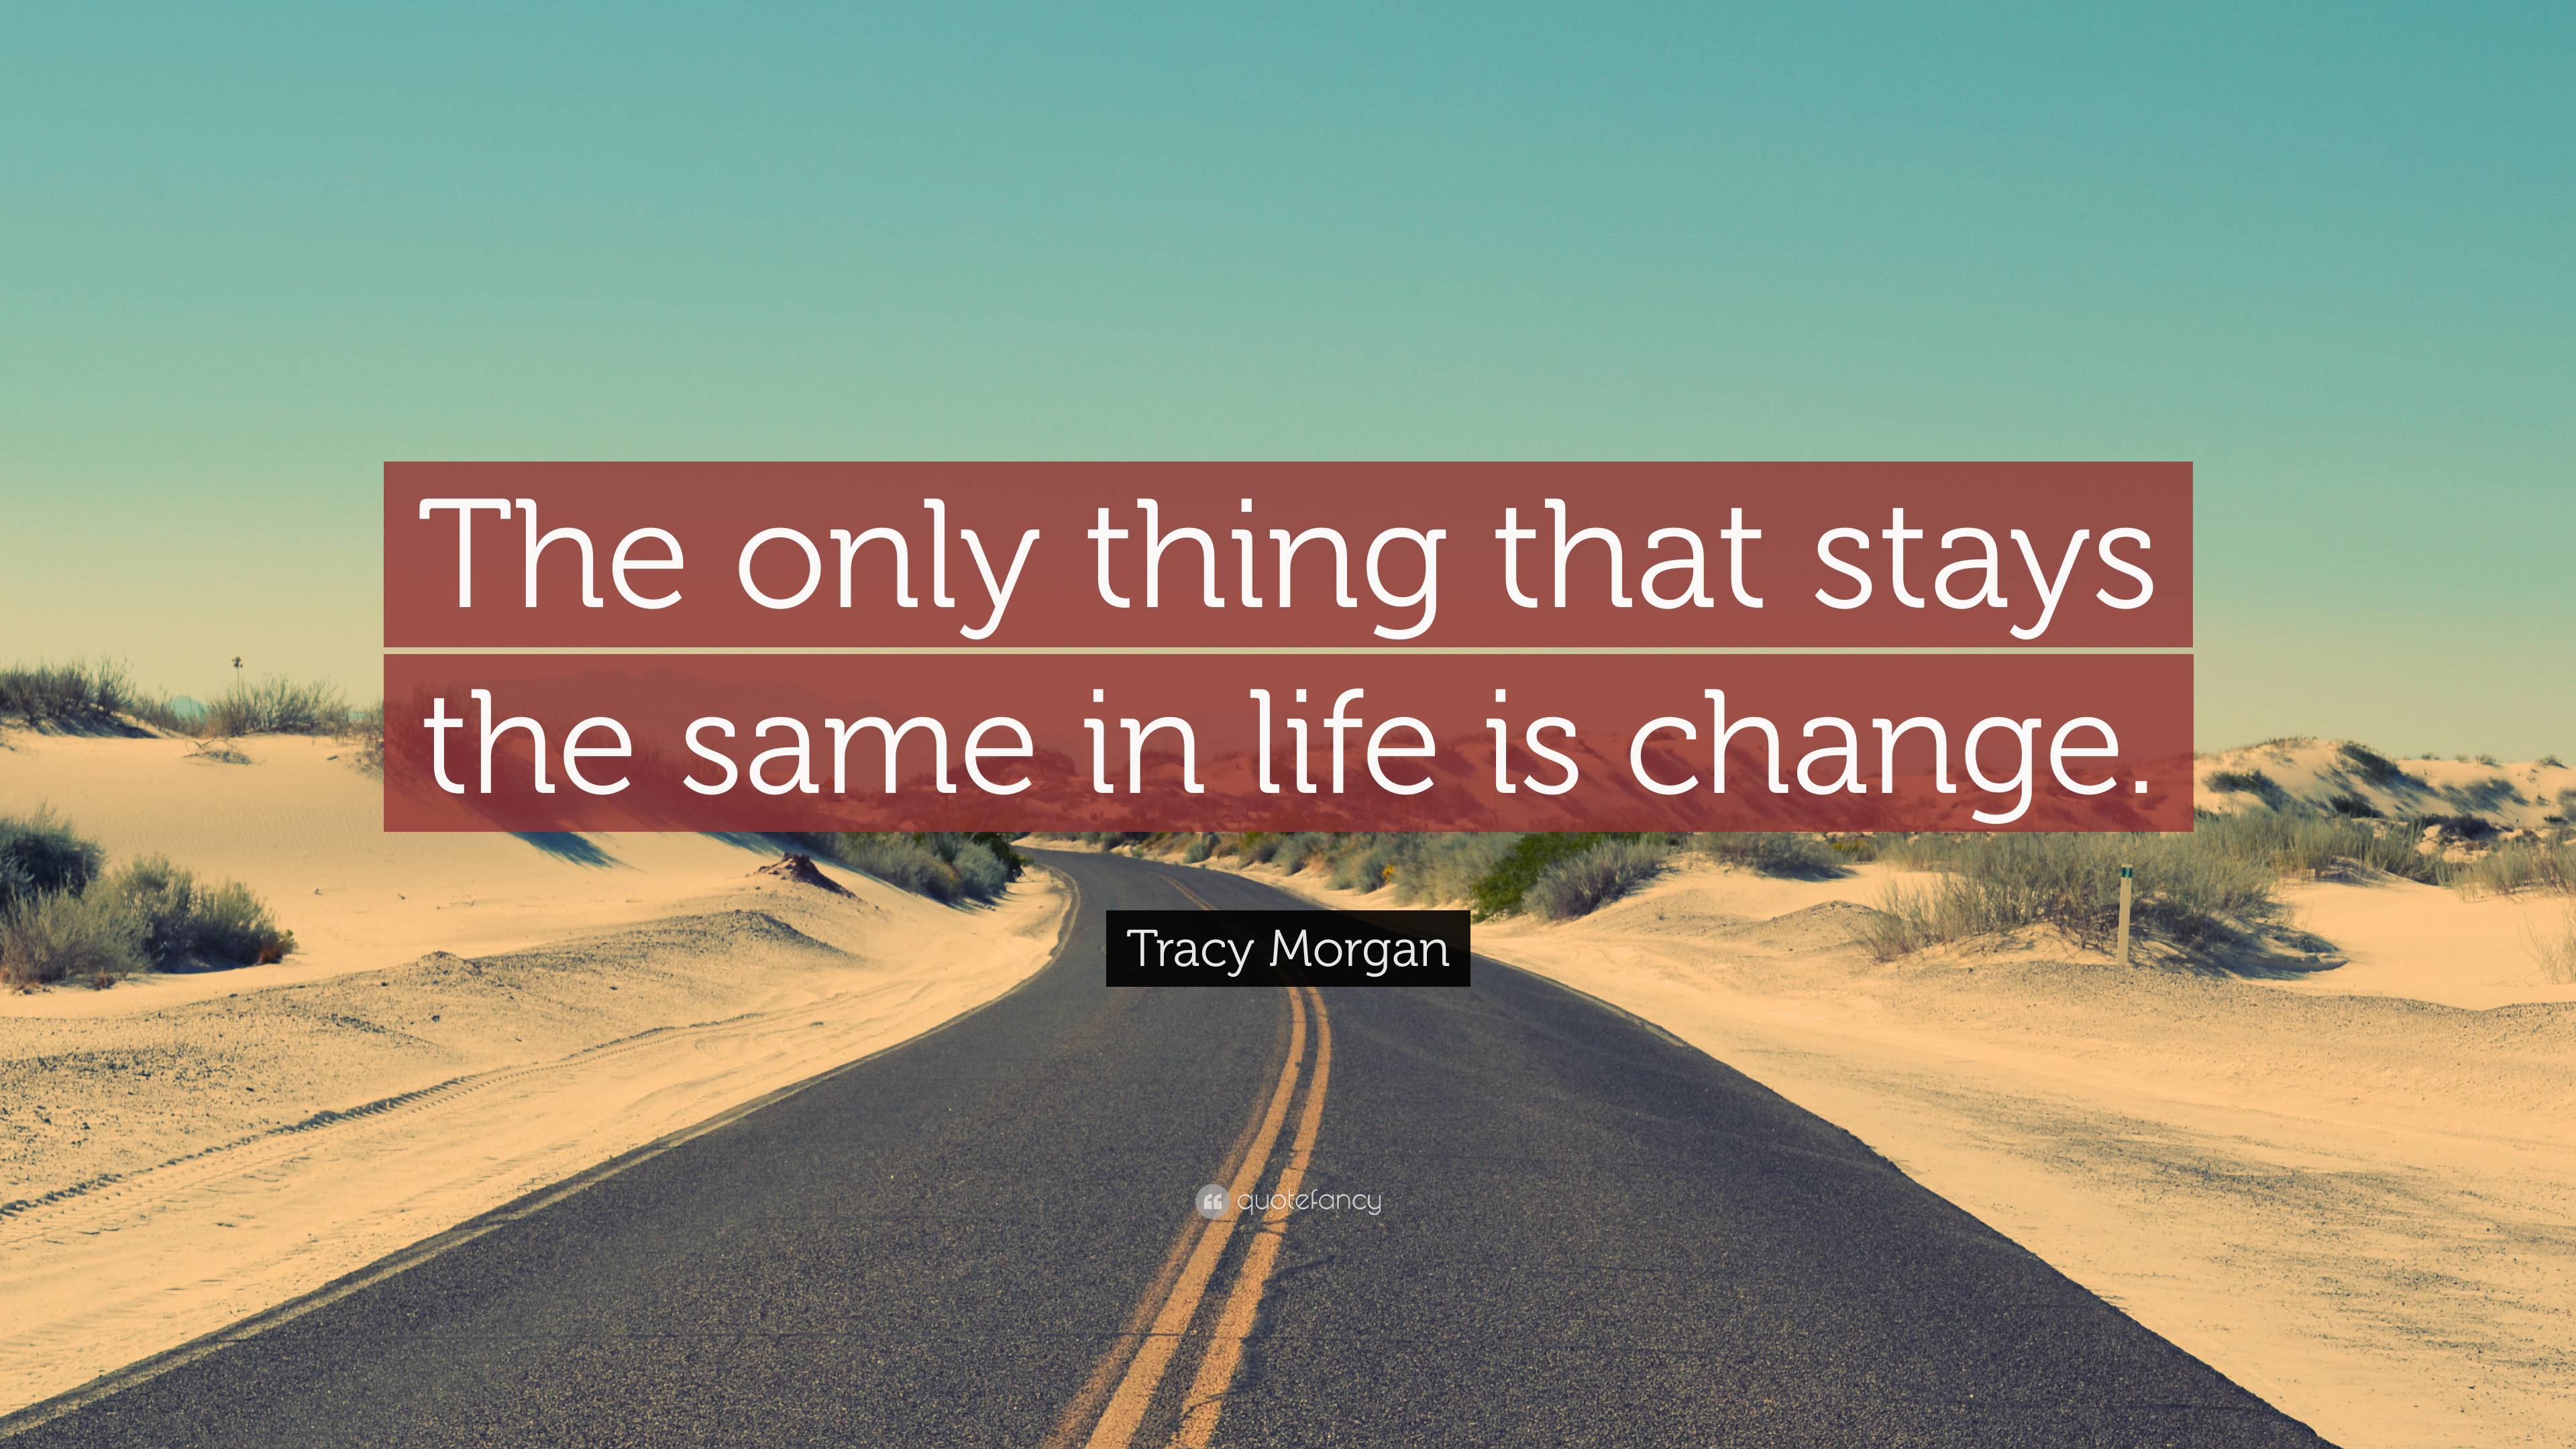 Tracy Morgan Quote The Only Thing That Stays The Same In Life Is Change